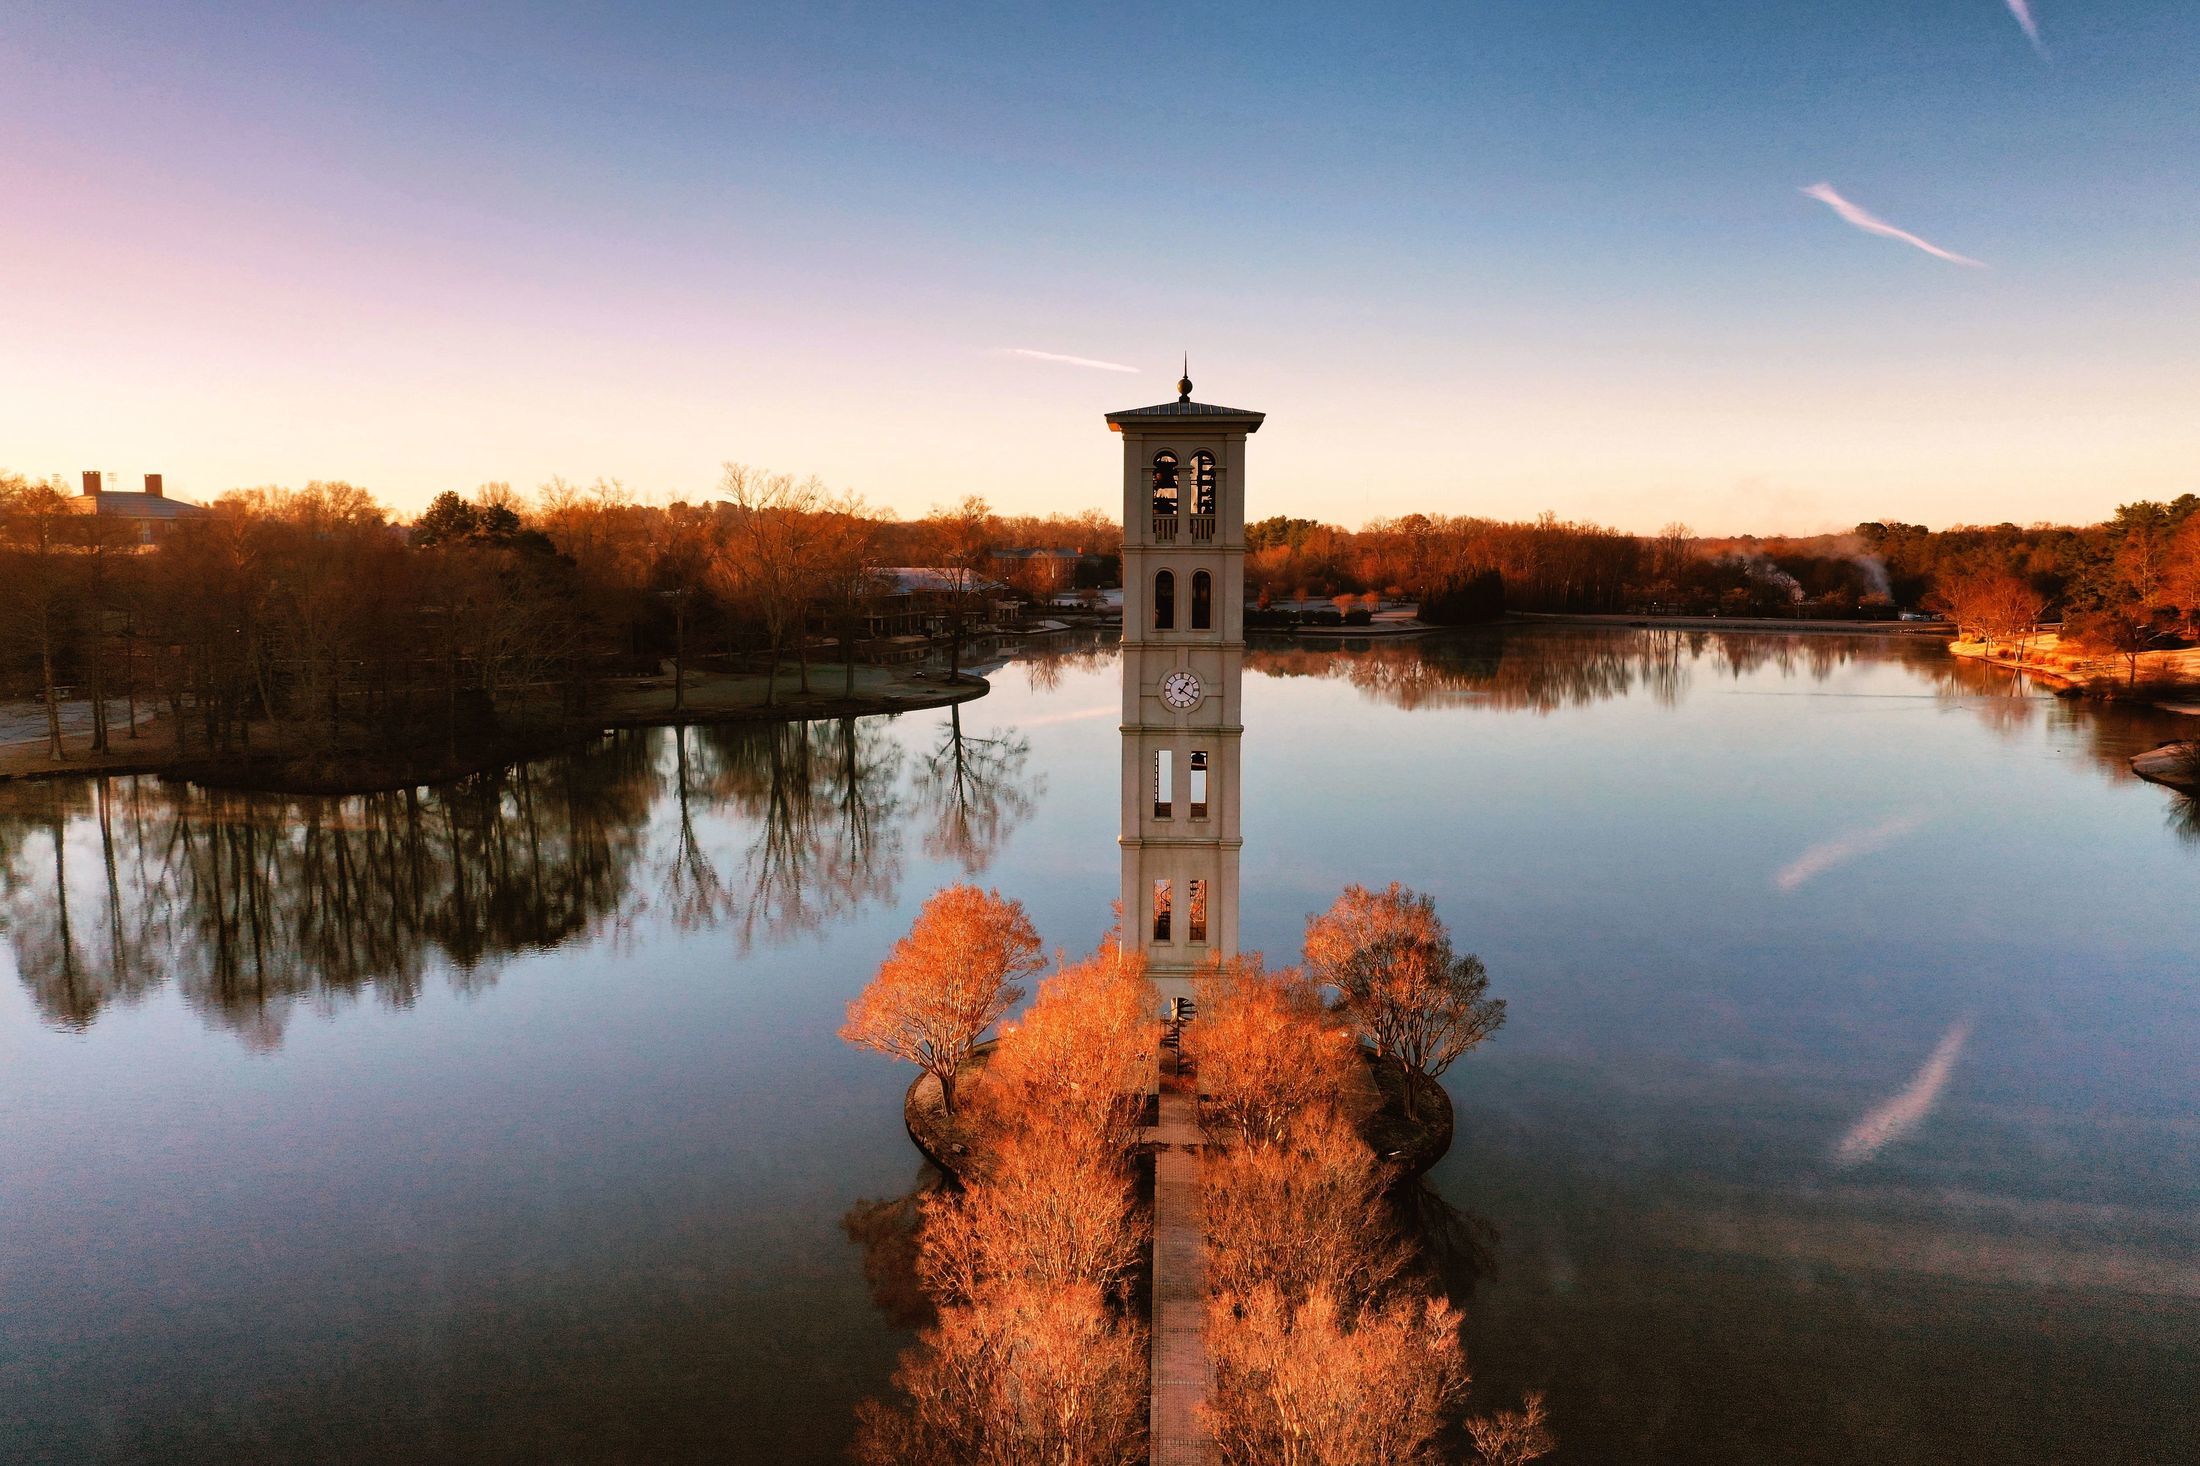 Furman Bell Tower at sunset